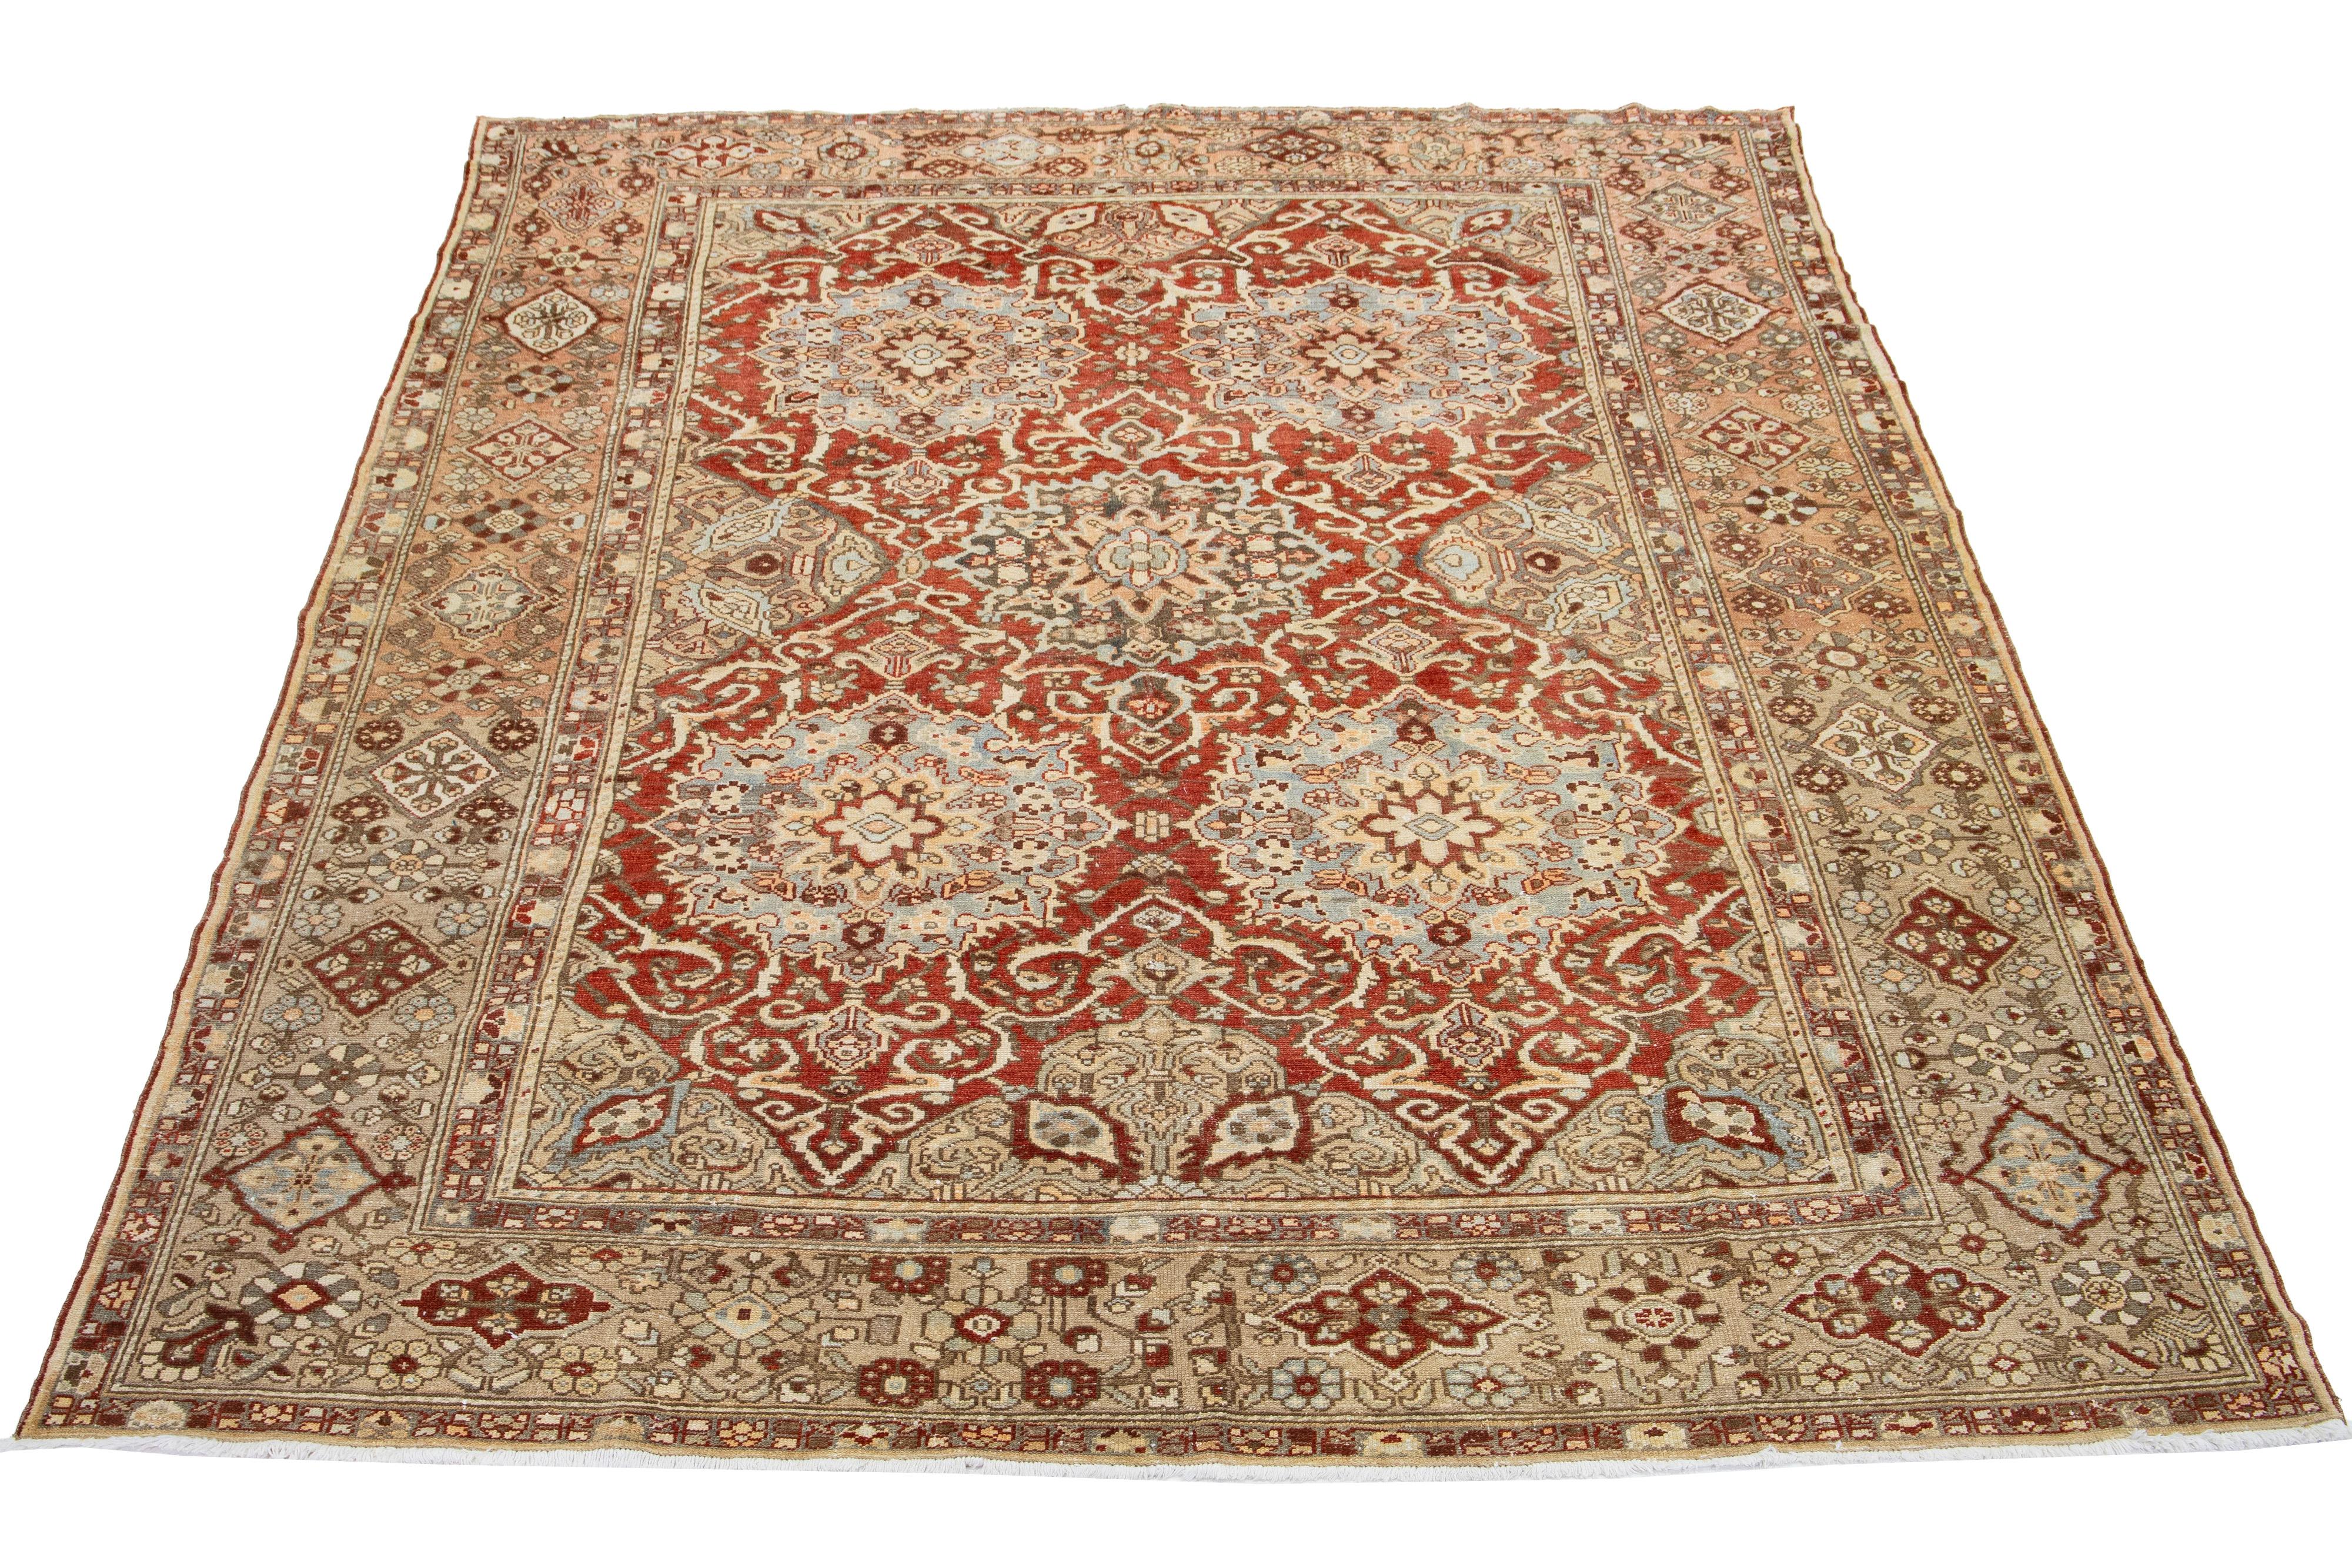 Beautiful Antique Bakhtiari hand-knotted wool rug with a red-rust color field. This Persian piece has blue, beige, and peach hues on a classic rosette design.

This rug measures 9'7